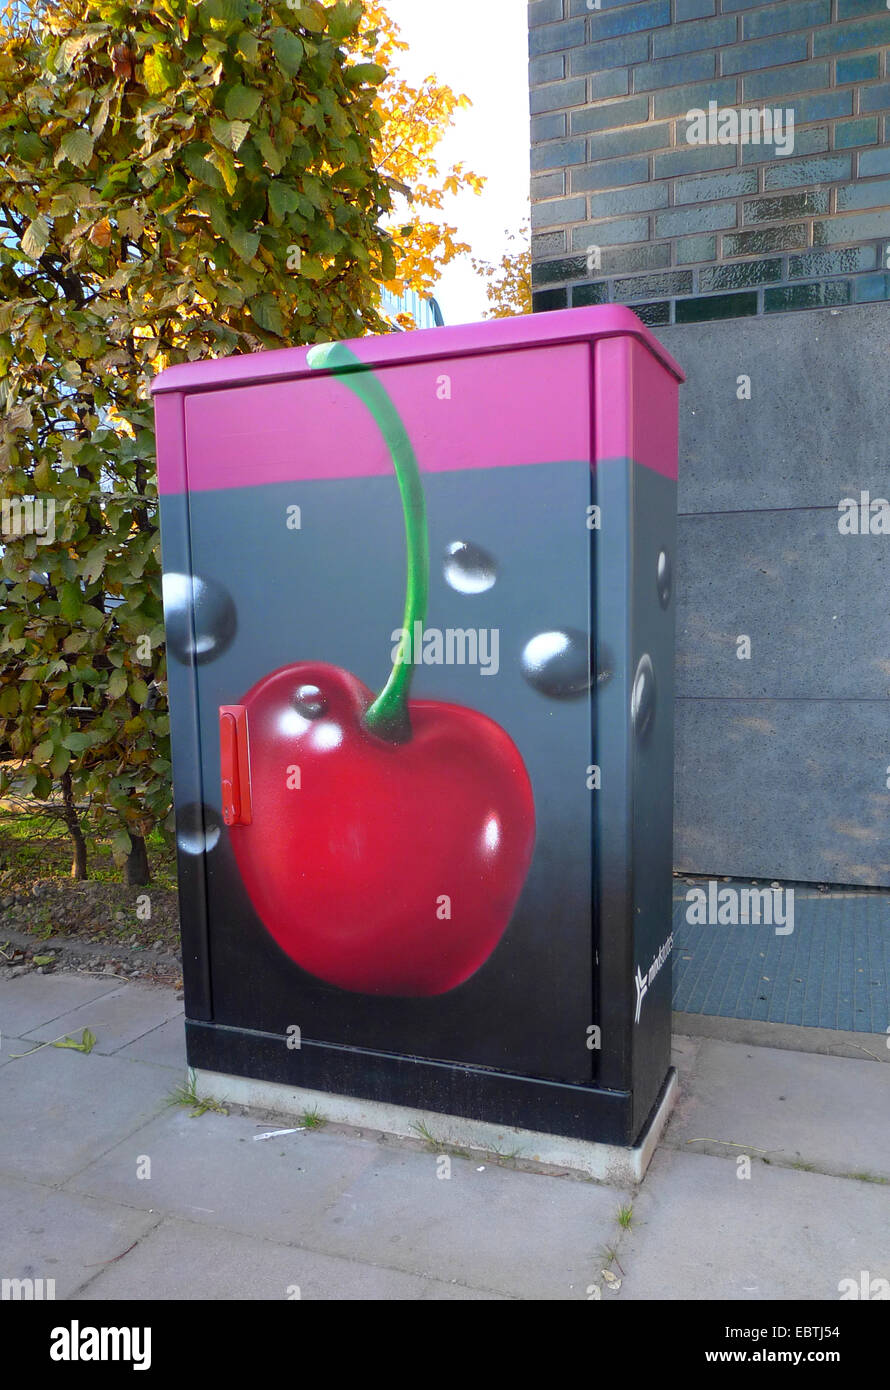 painted panelboard with cherry immersed in a drink, Germany, North Rhine-Westphalia, Duesseldorf Stock Photo